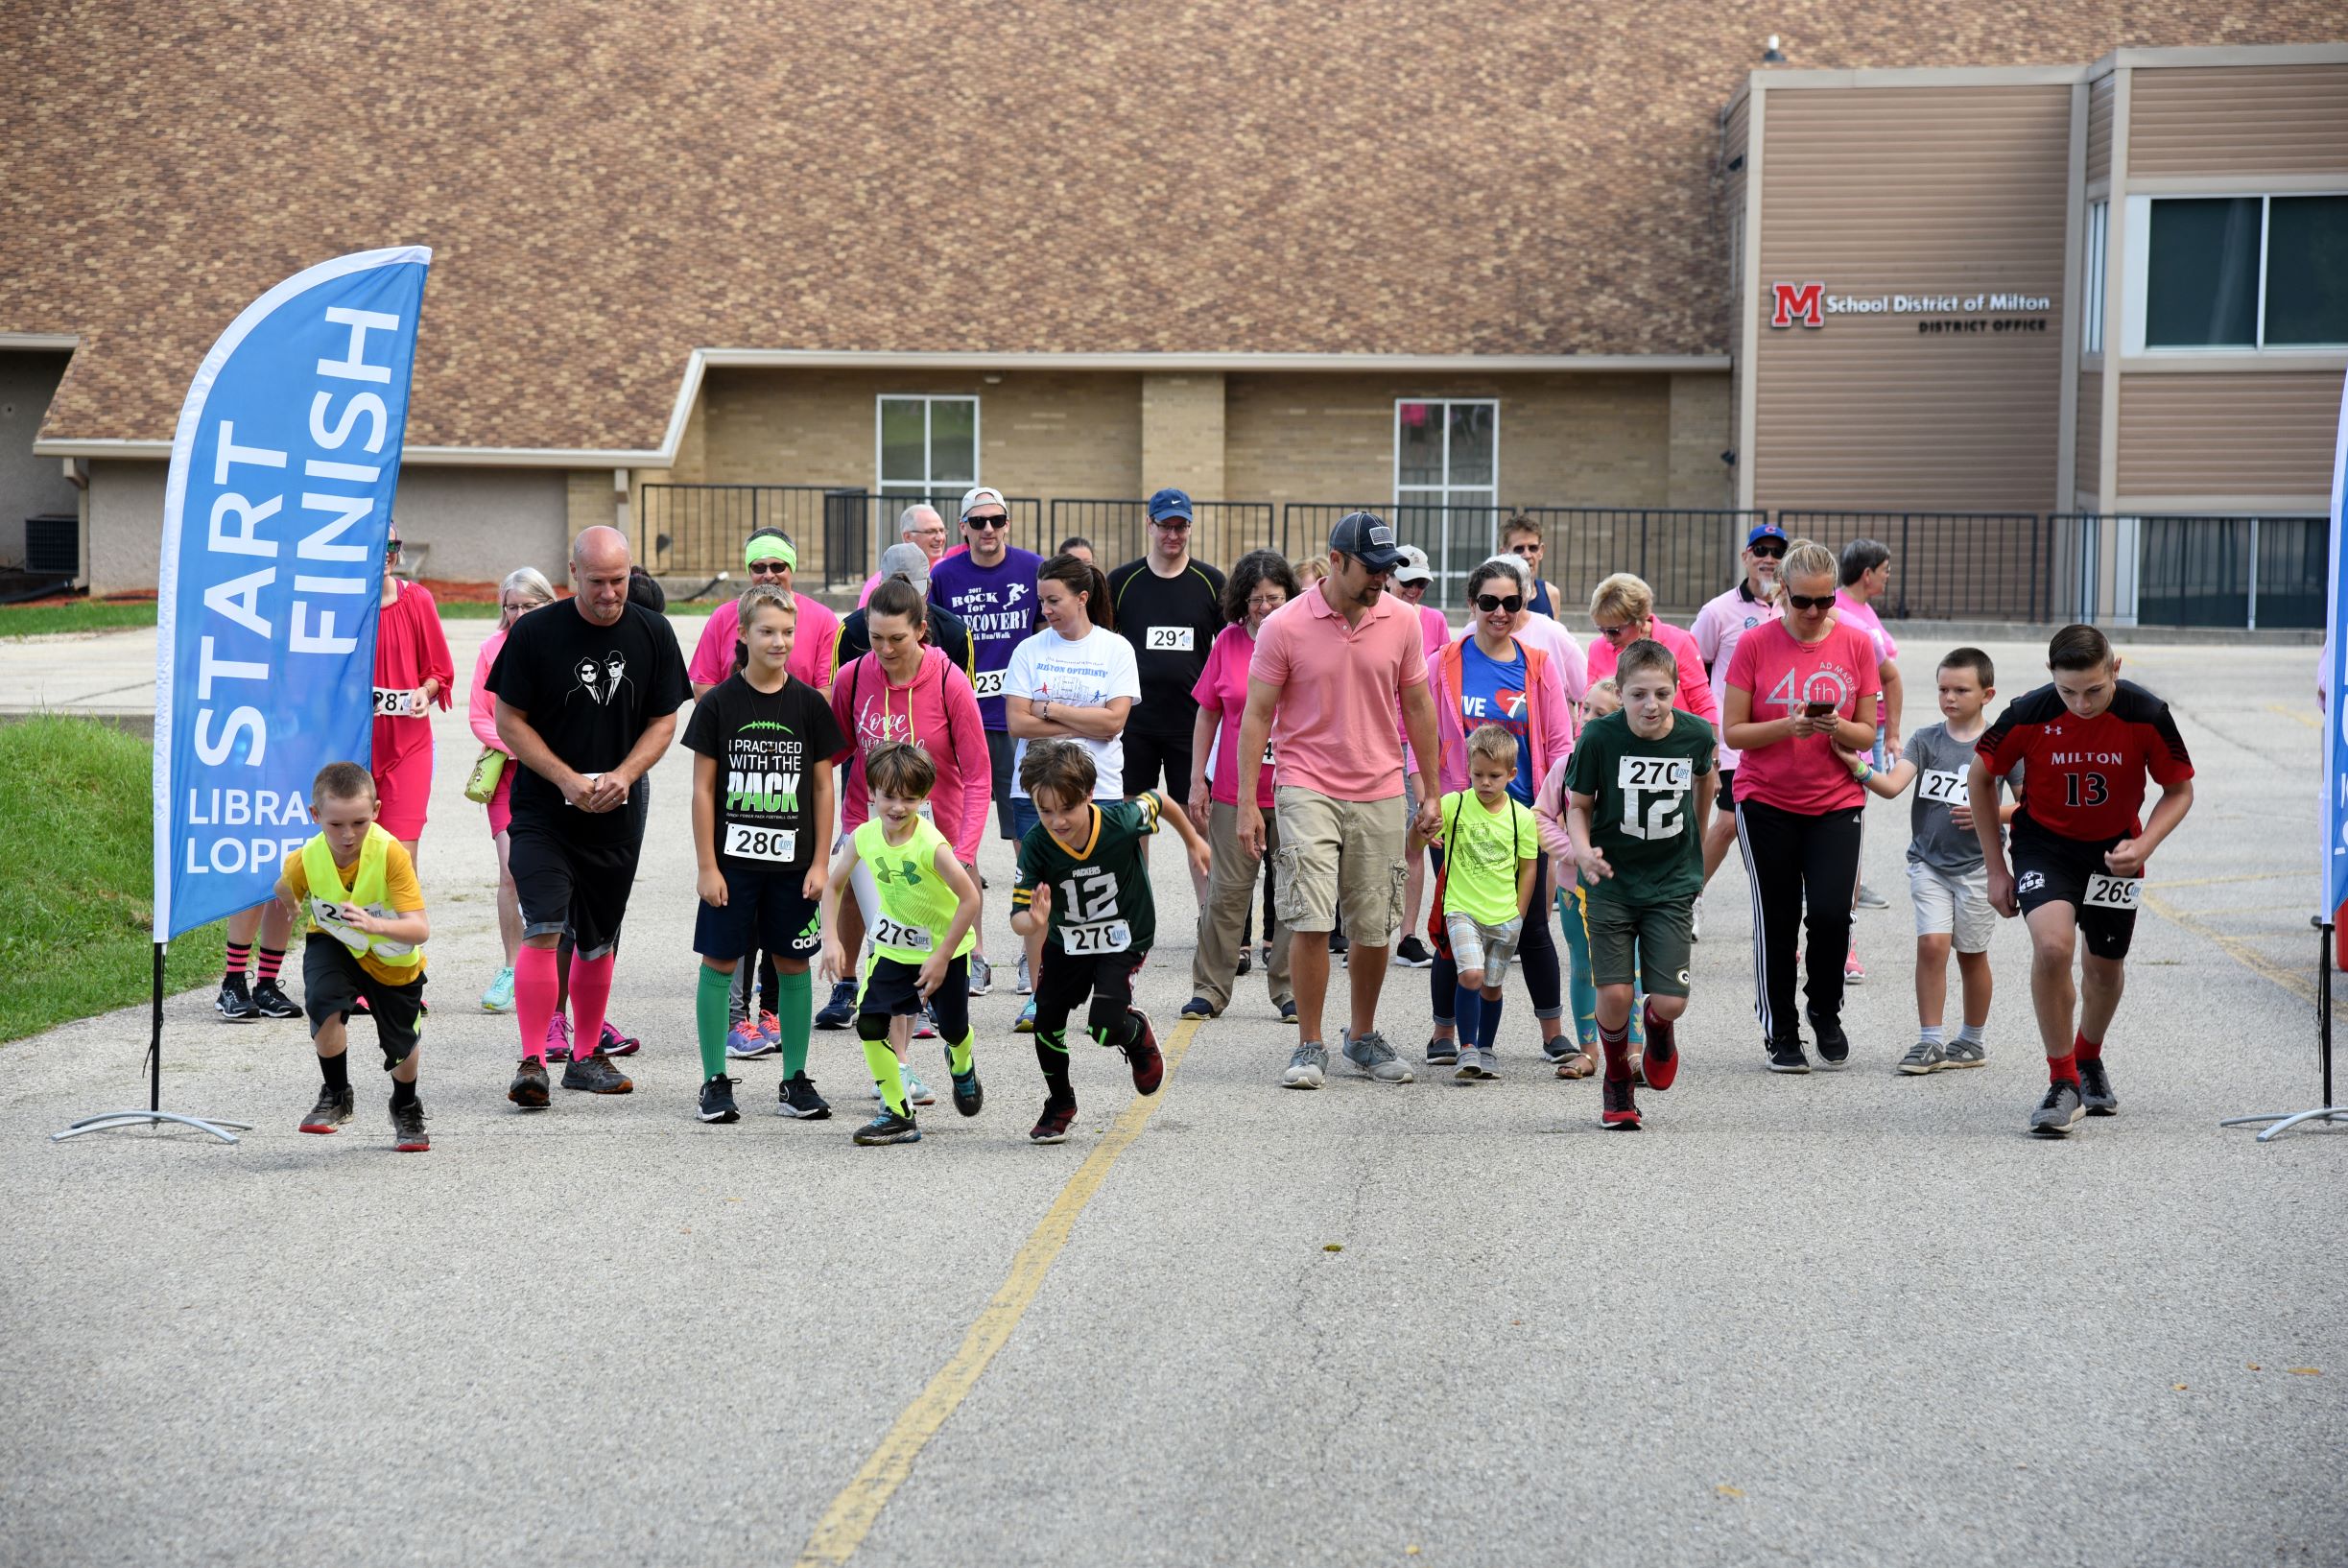 Annual Library Lope runners leaving the start line